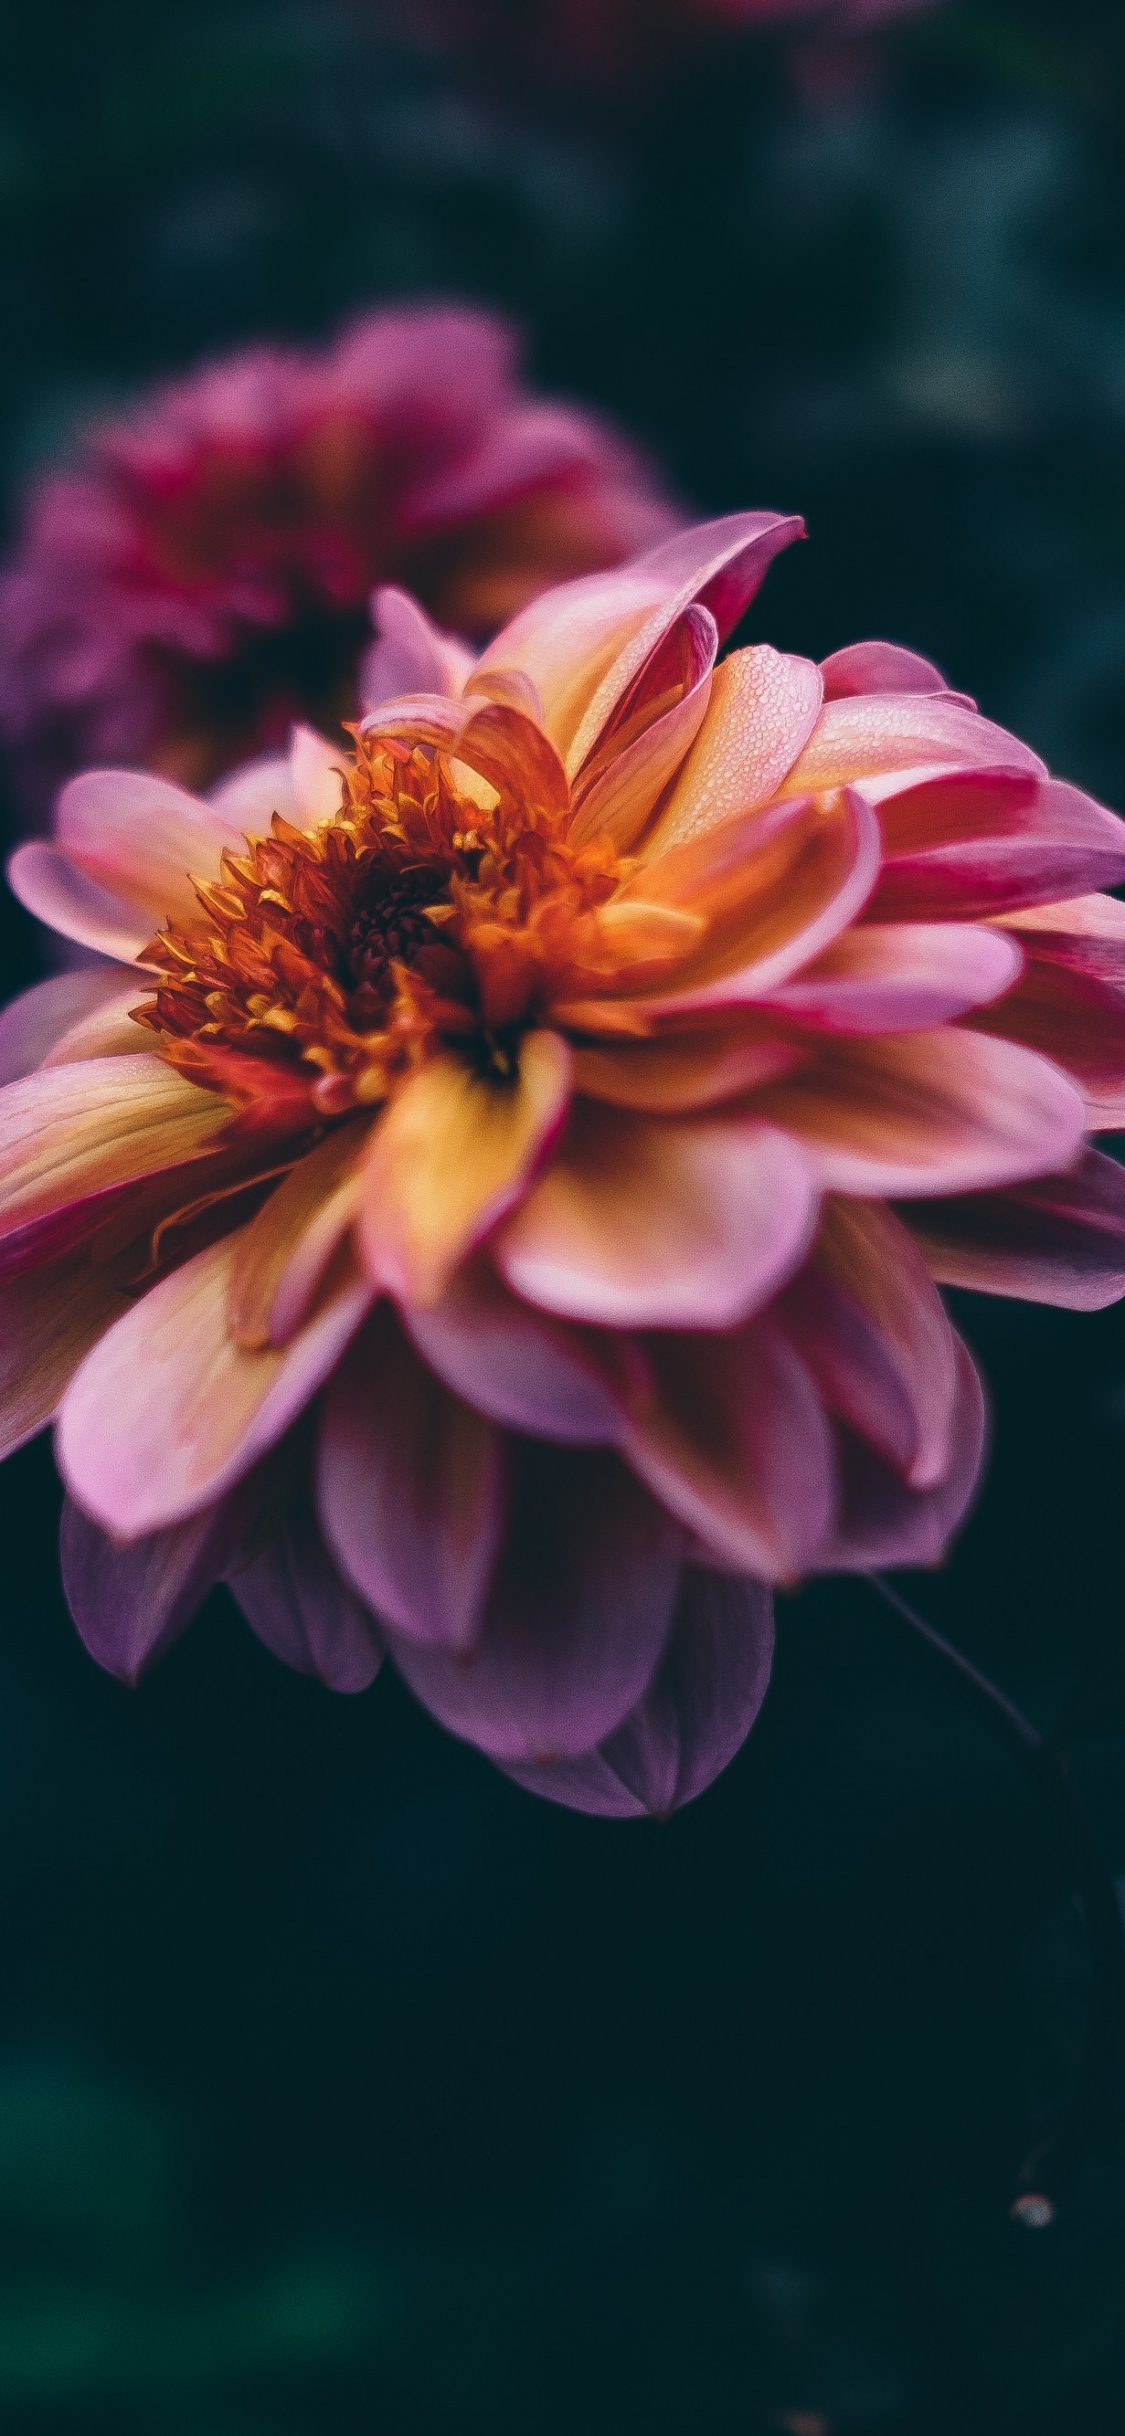 Pink and Yellow Flower in Tilt Shift Lens. Wallpaper in 1125x2436 Resolution